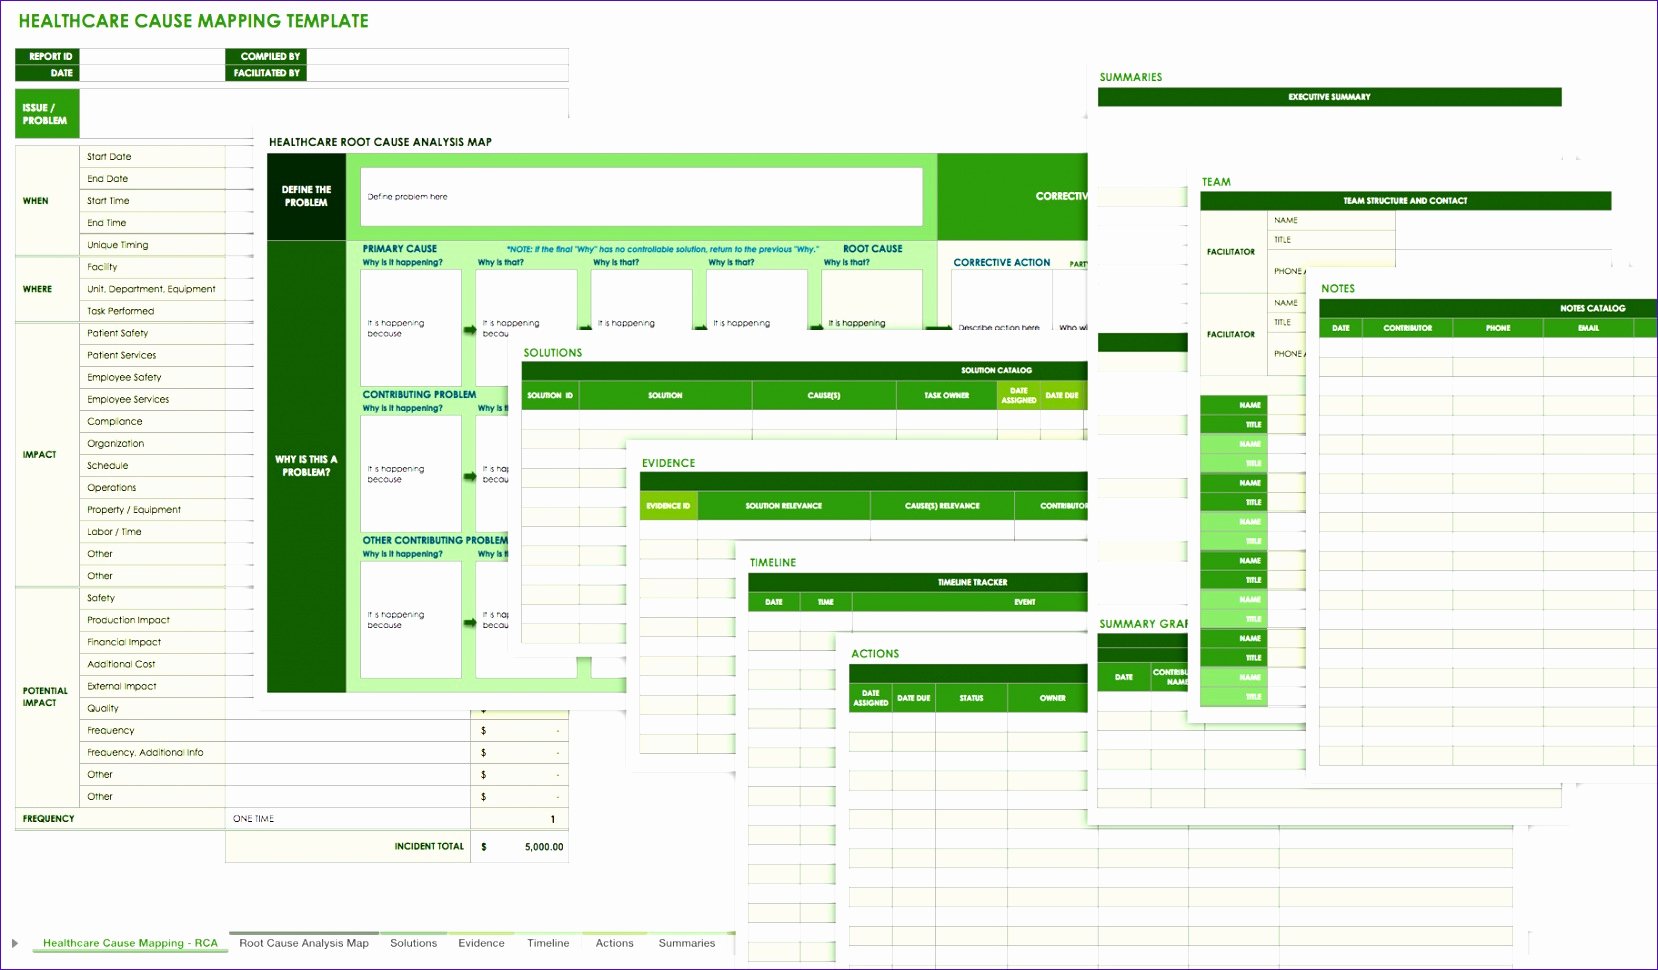 Training Matrix Template Excel Lovely 9 Free Training Matrix Template Excel Exceltemplates